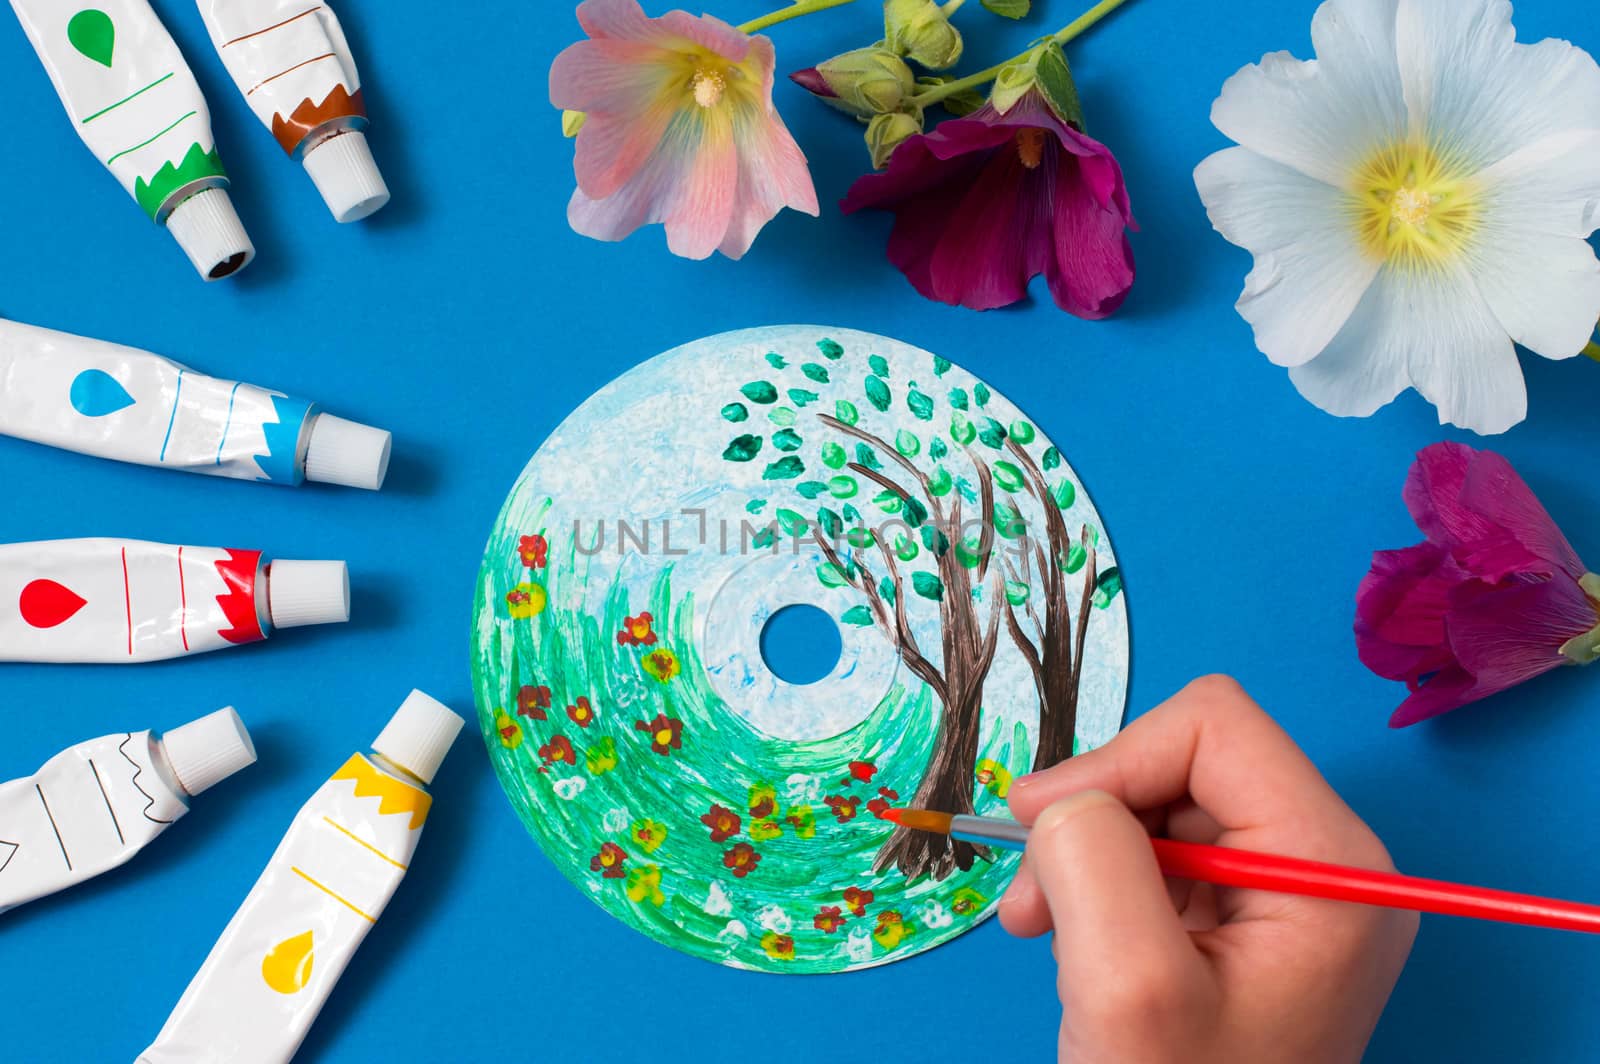 Painting with acrylics paints on CD. Seasons. Summer landscape. Creative art project 